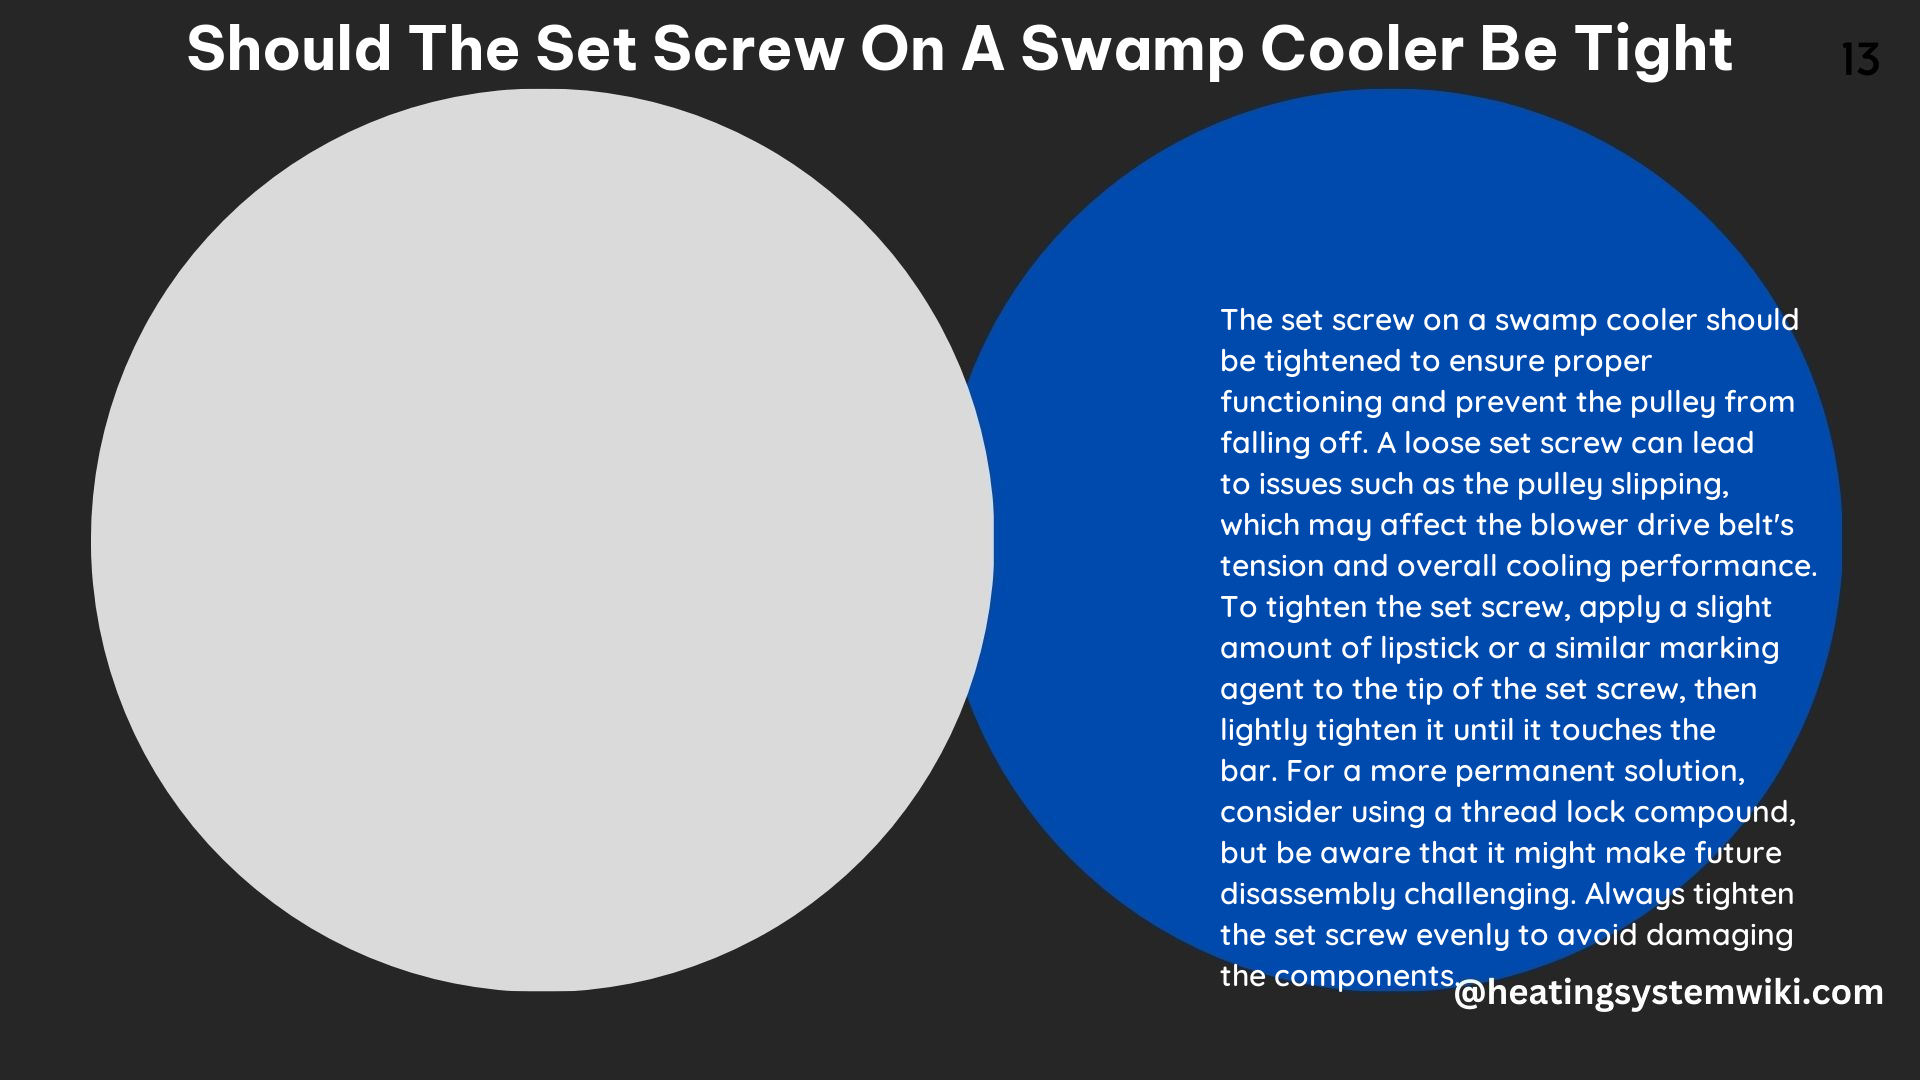 Should the Set Screw On a Swamp Cooler Be Tight